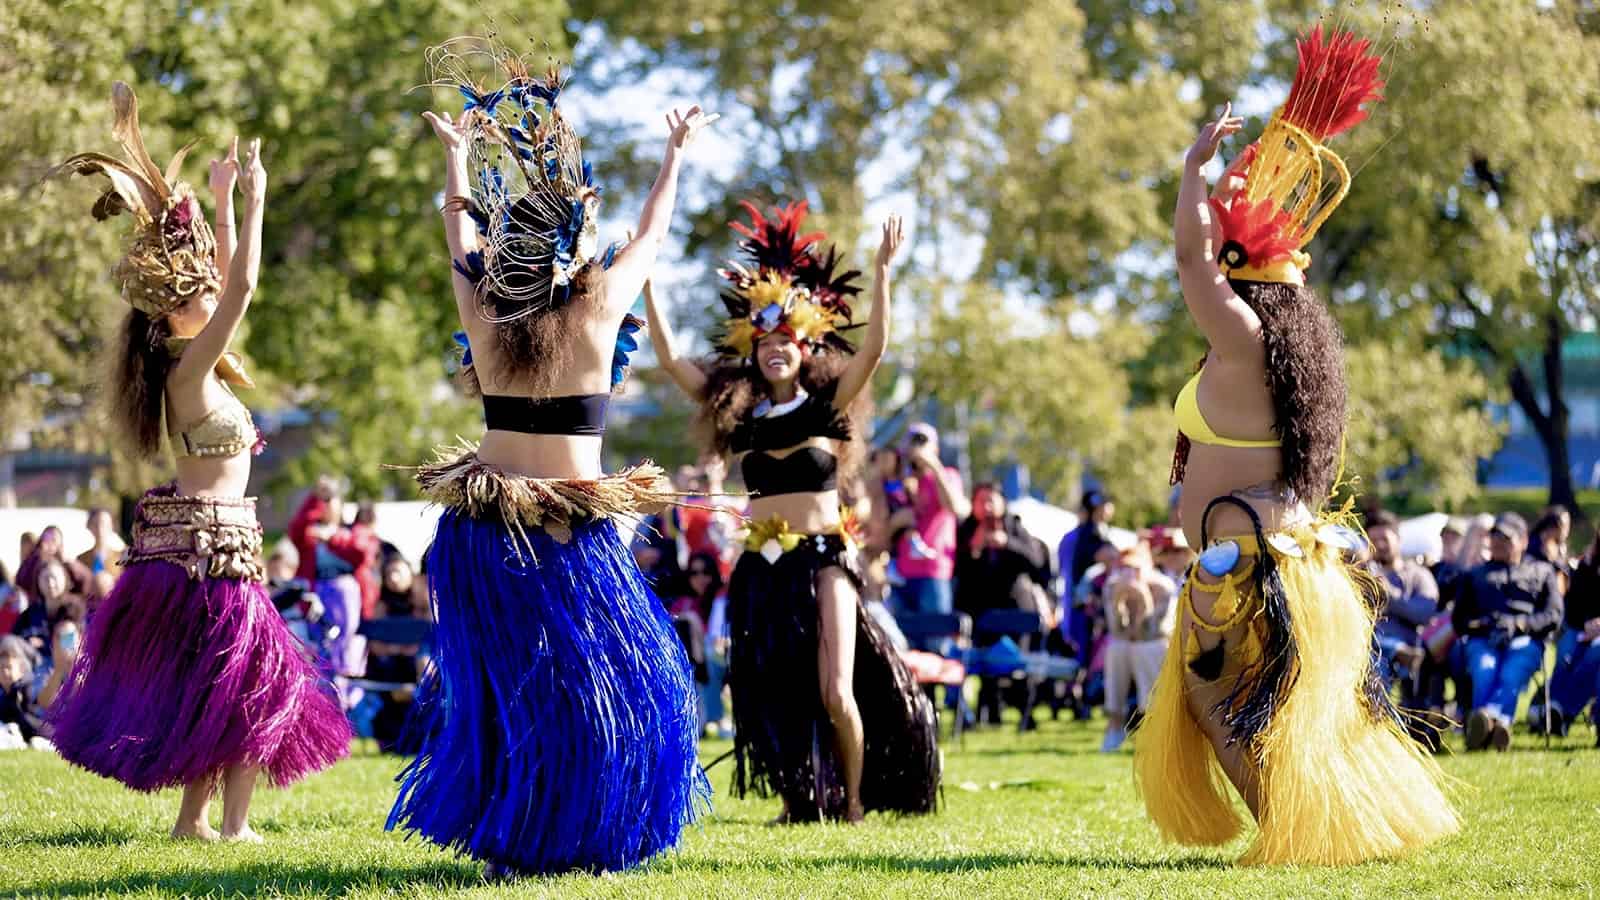 Te Ao Mana performs outside in the sun, a dance collective expanding the presence of Indigenous Polynesian culture worldwide. Press photo courtesy of Jacob's Pillow